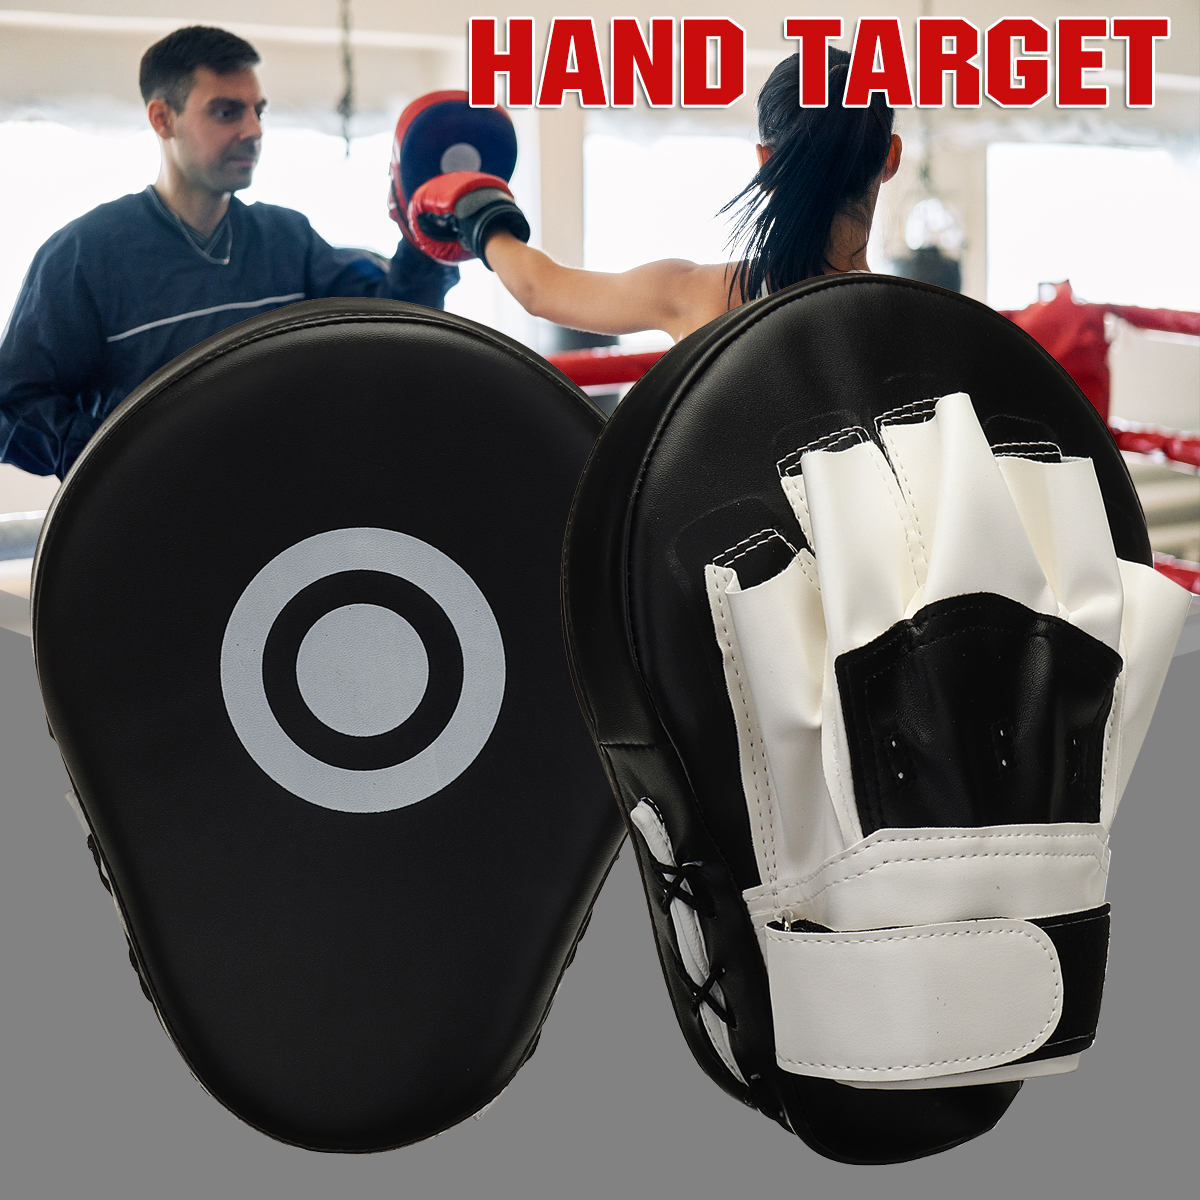 PU-Thicken-Boxer-Target-Pads-Boxing-Gloves-Focus-Mitts-For-Muay-Kick-MMA-Training-Boxing-Hand-Target-1792132-1